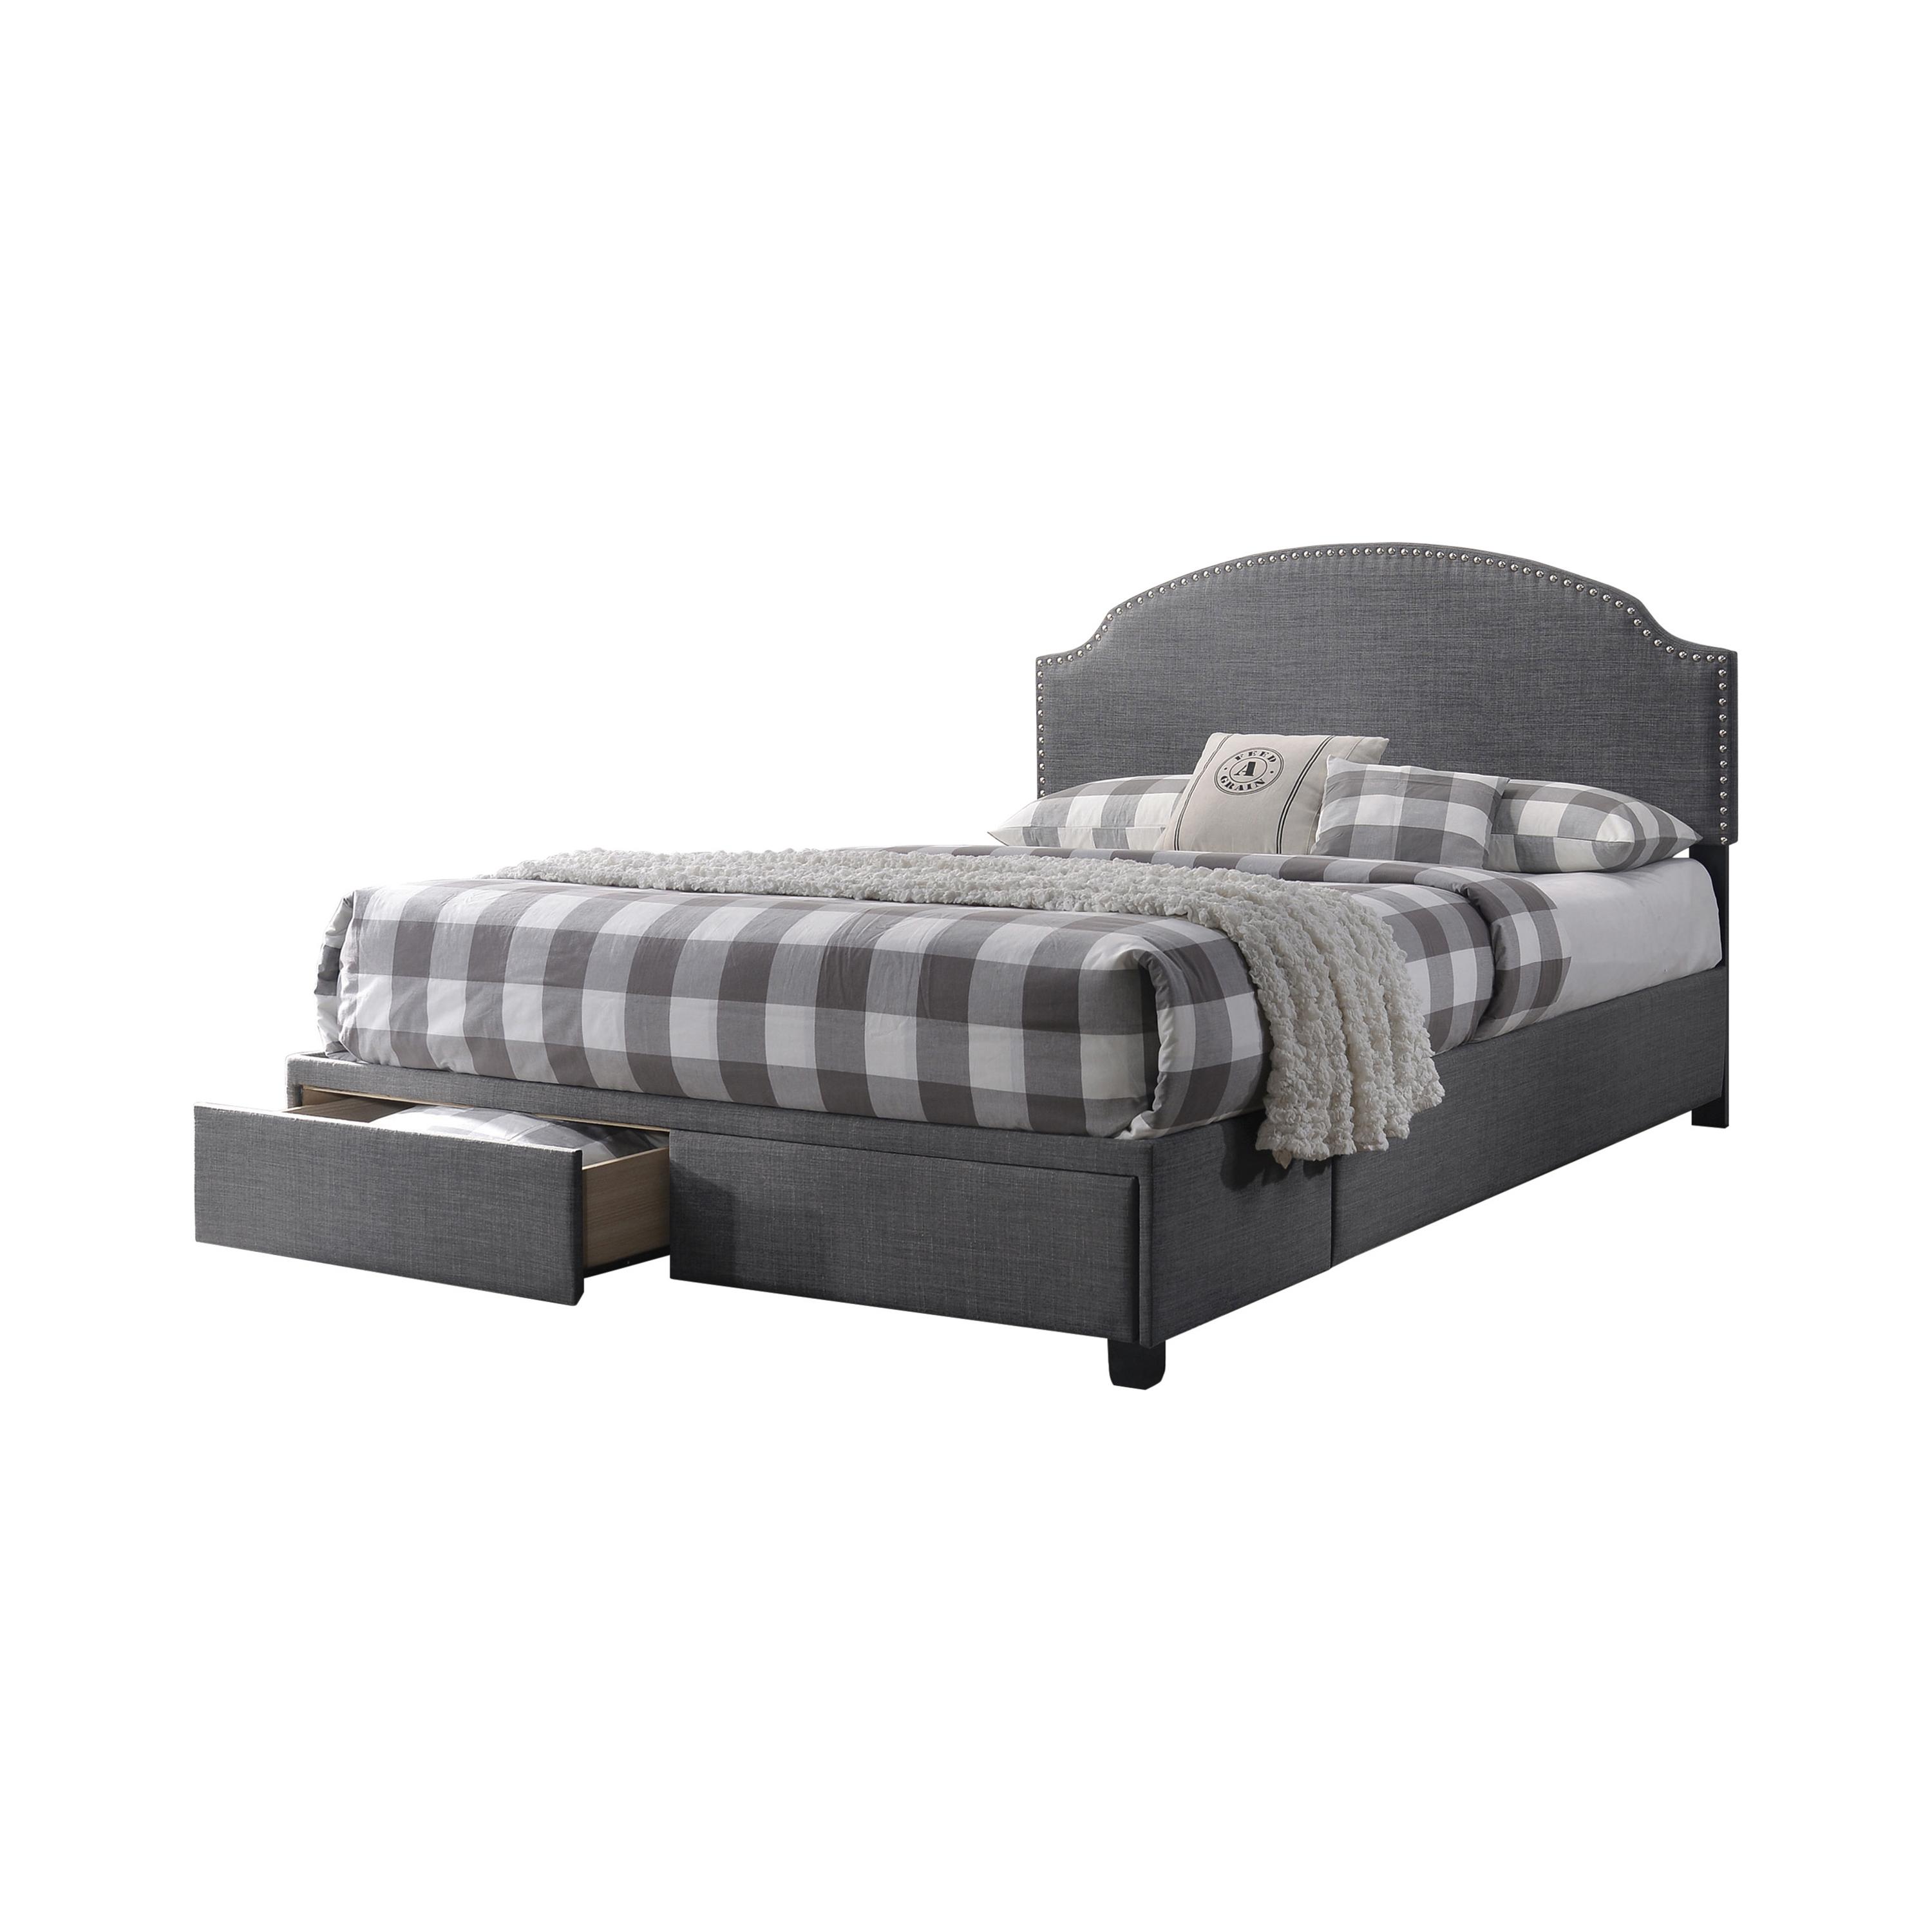 Modern Bed 305895Q Niland 305895Q in Charcoal Fabric